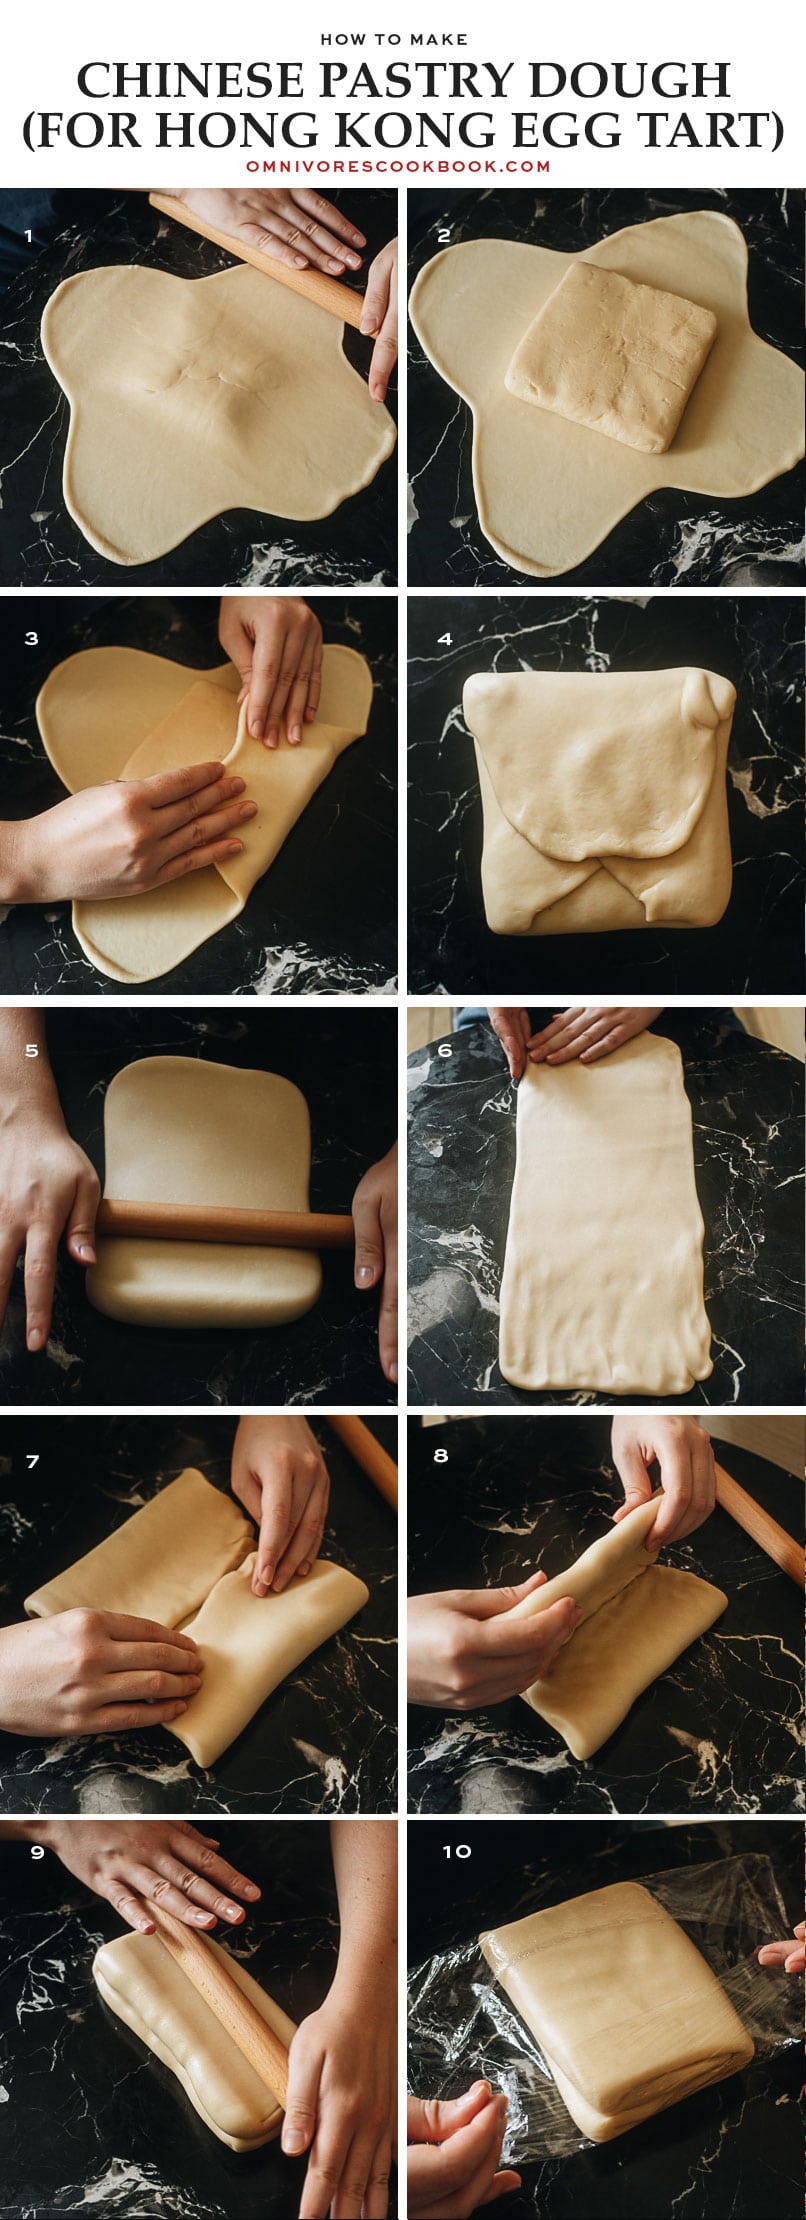 How to make Chinese pastry dough step-by-step